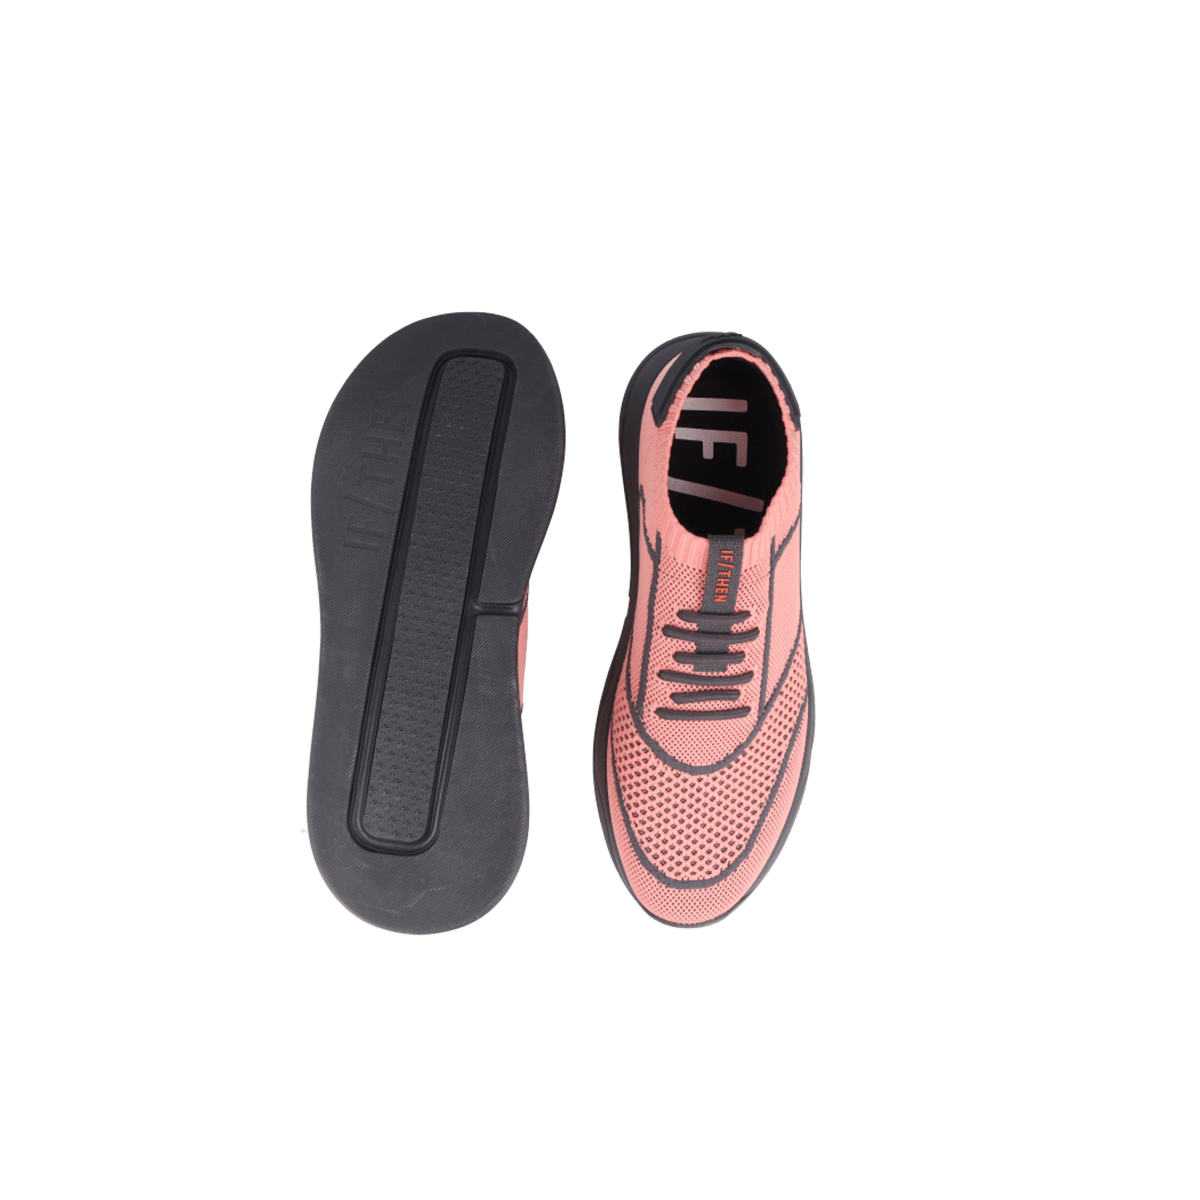 IF/THEN the Callisto men sneaker in shadow rose top and bottom